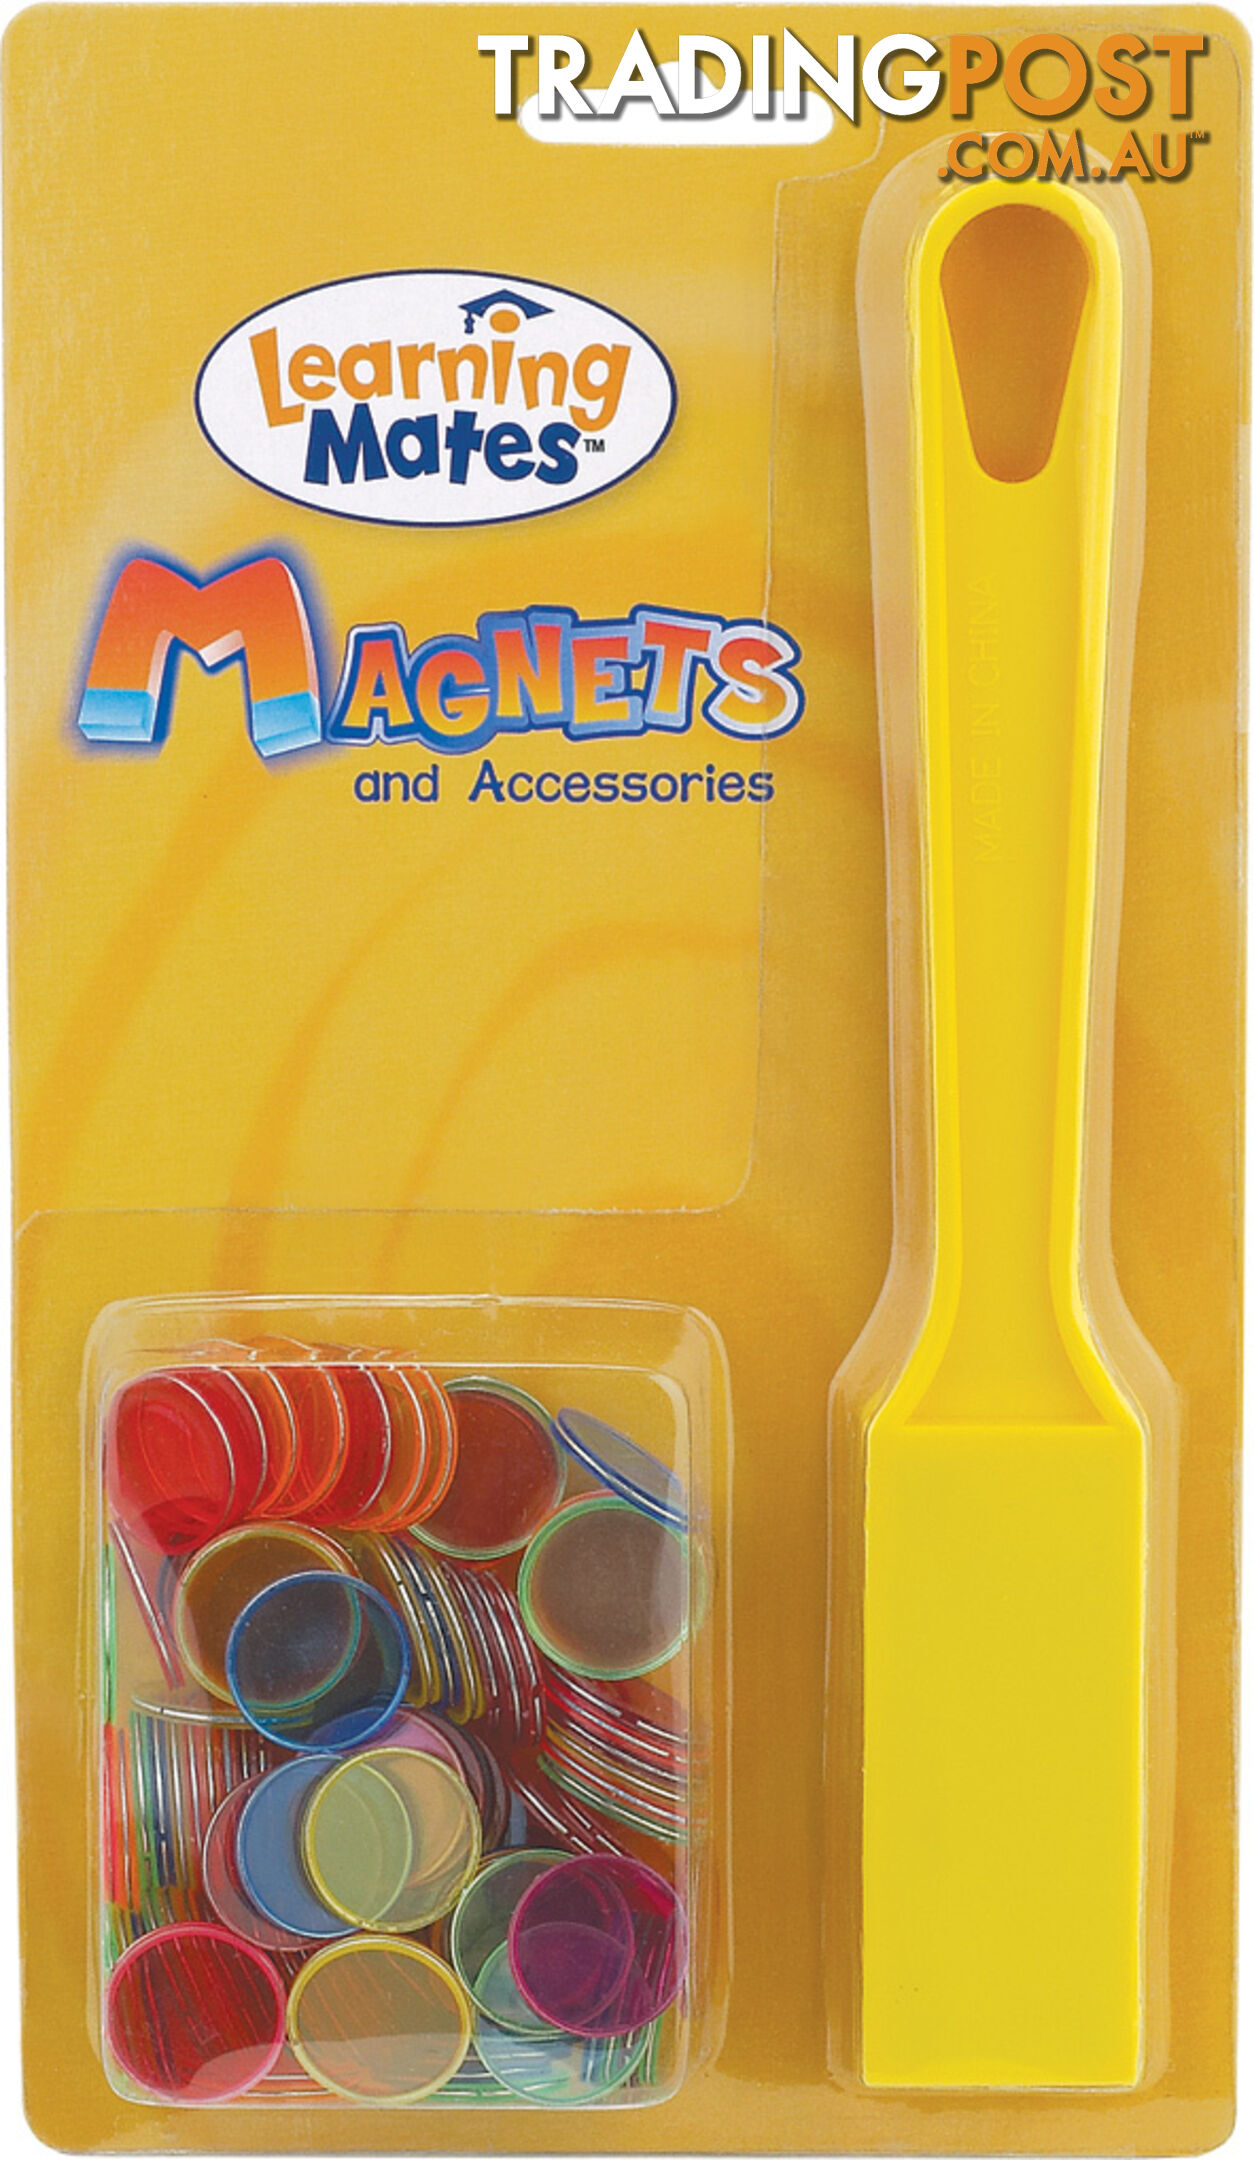 Magnetic Wand 8" plus 100 Chips - Popular Playthings - 755828388334